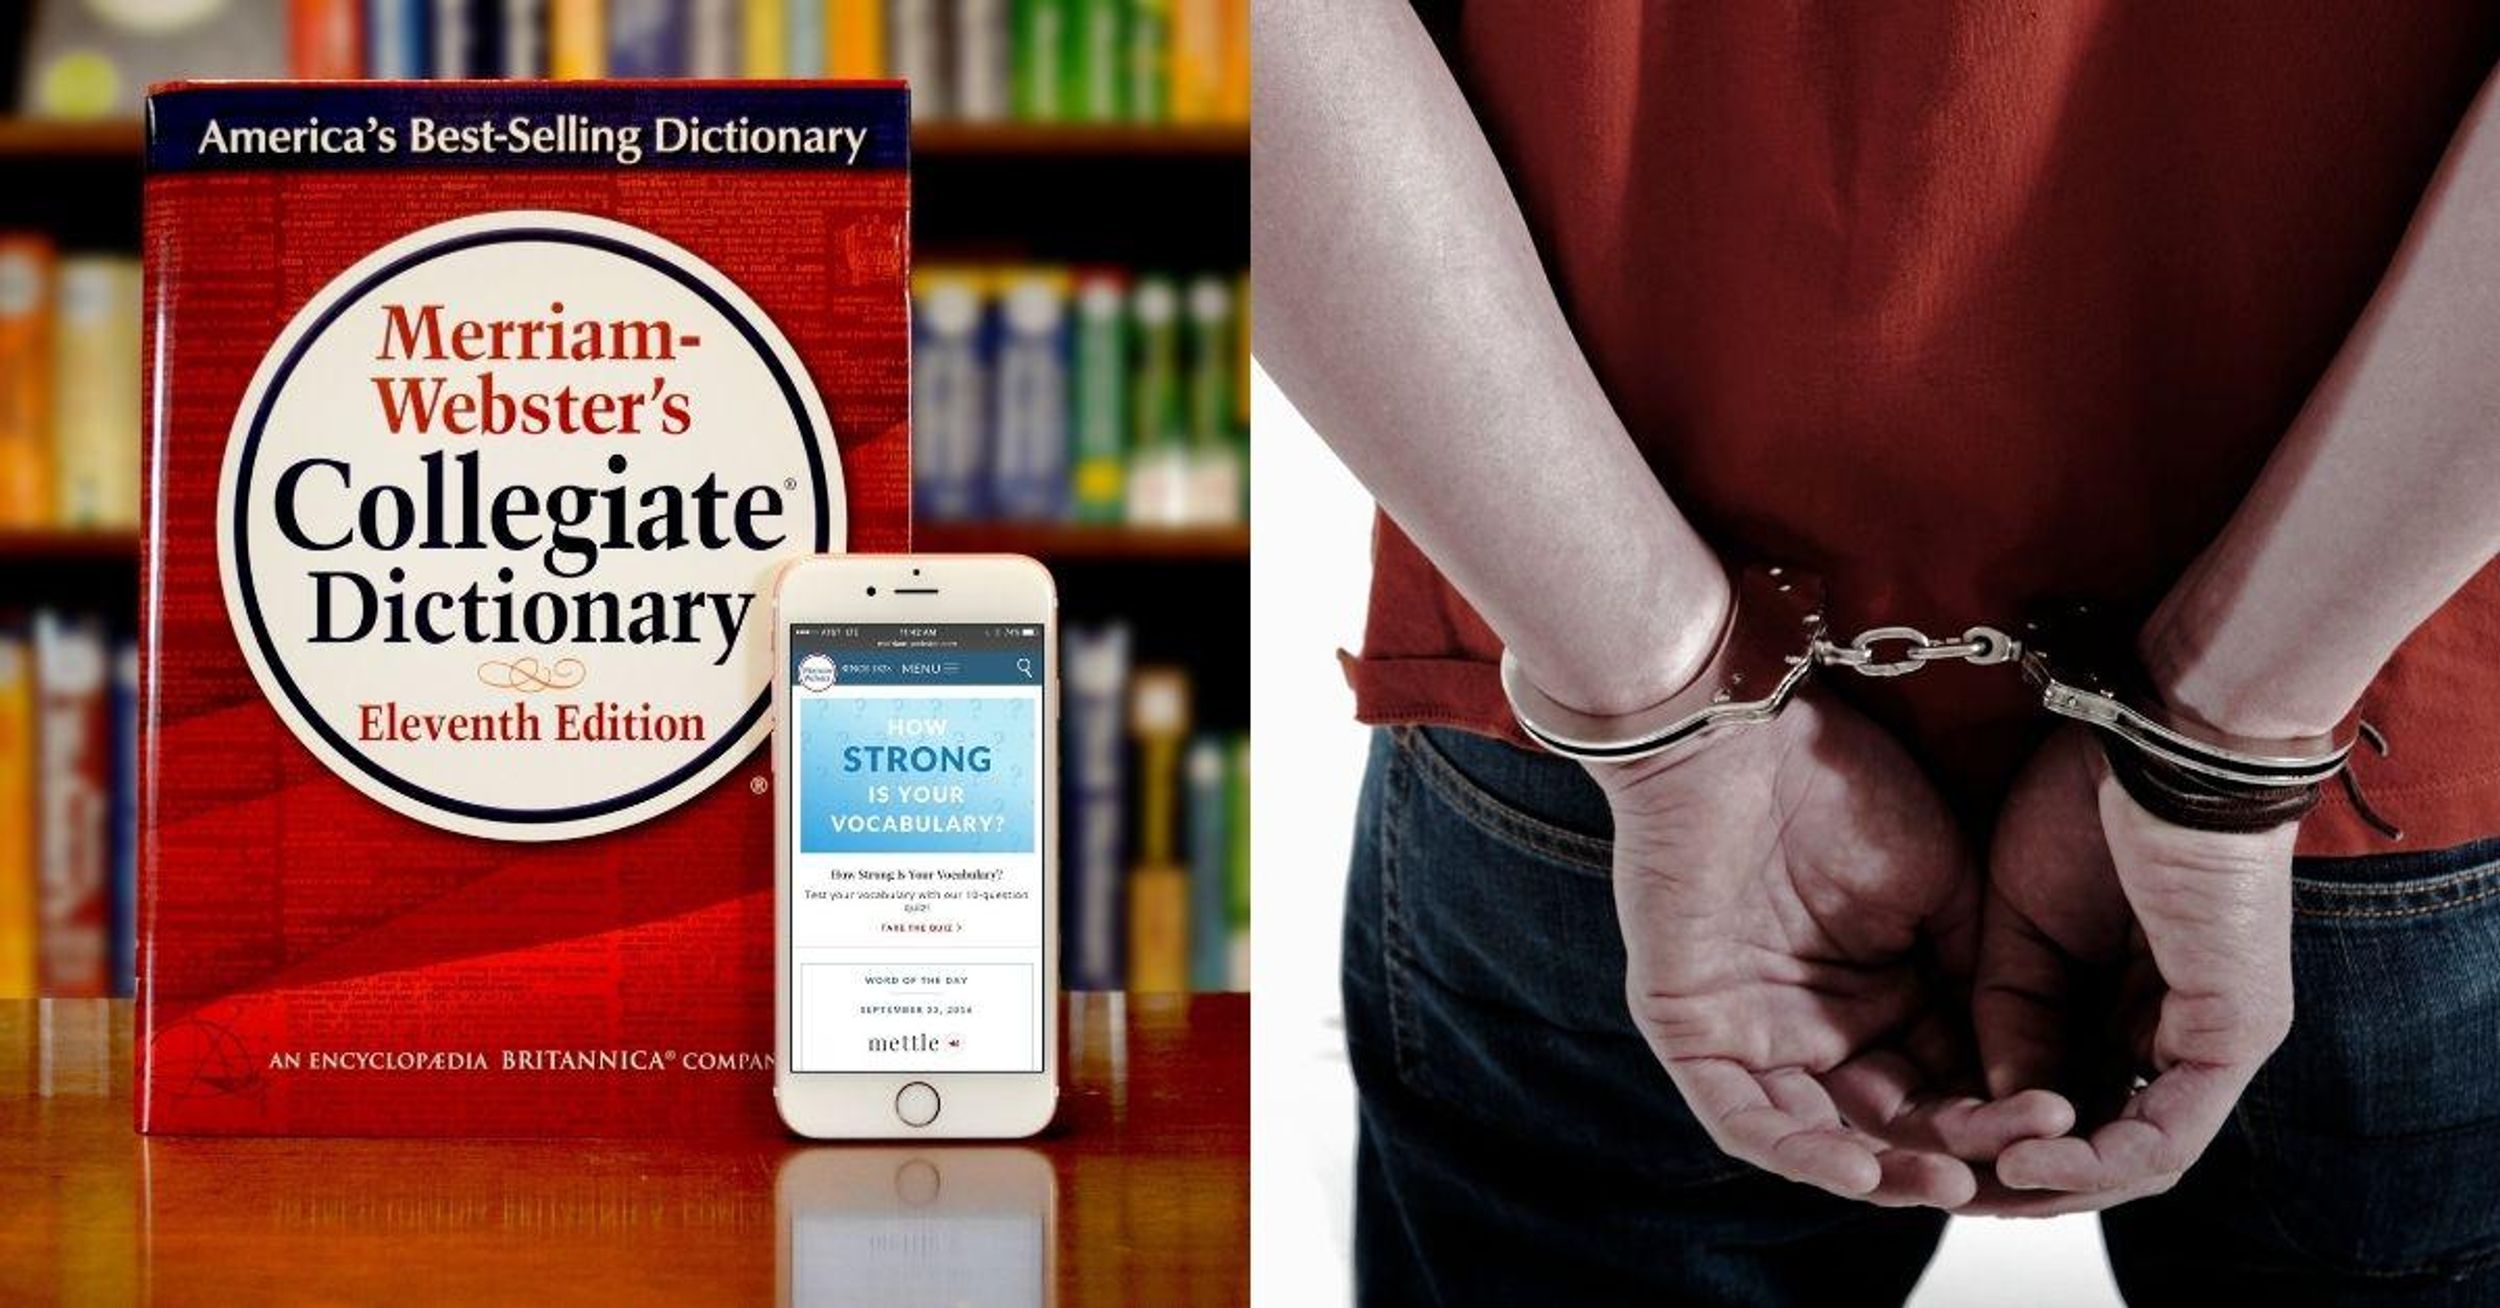 MAGA Fan Arrested After Threatening To Bomb Merriam-Webster Dictionary Over Inclusive Definitions